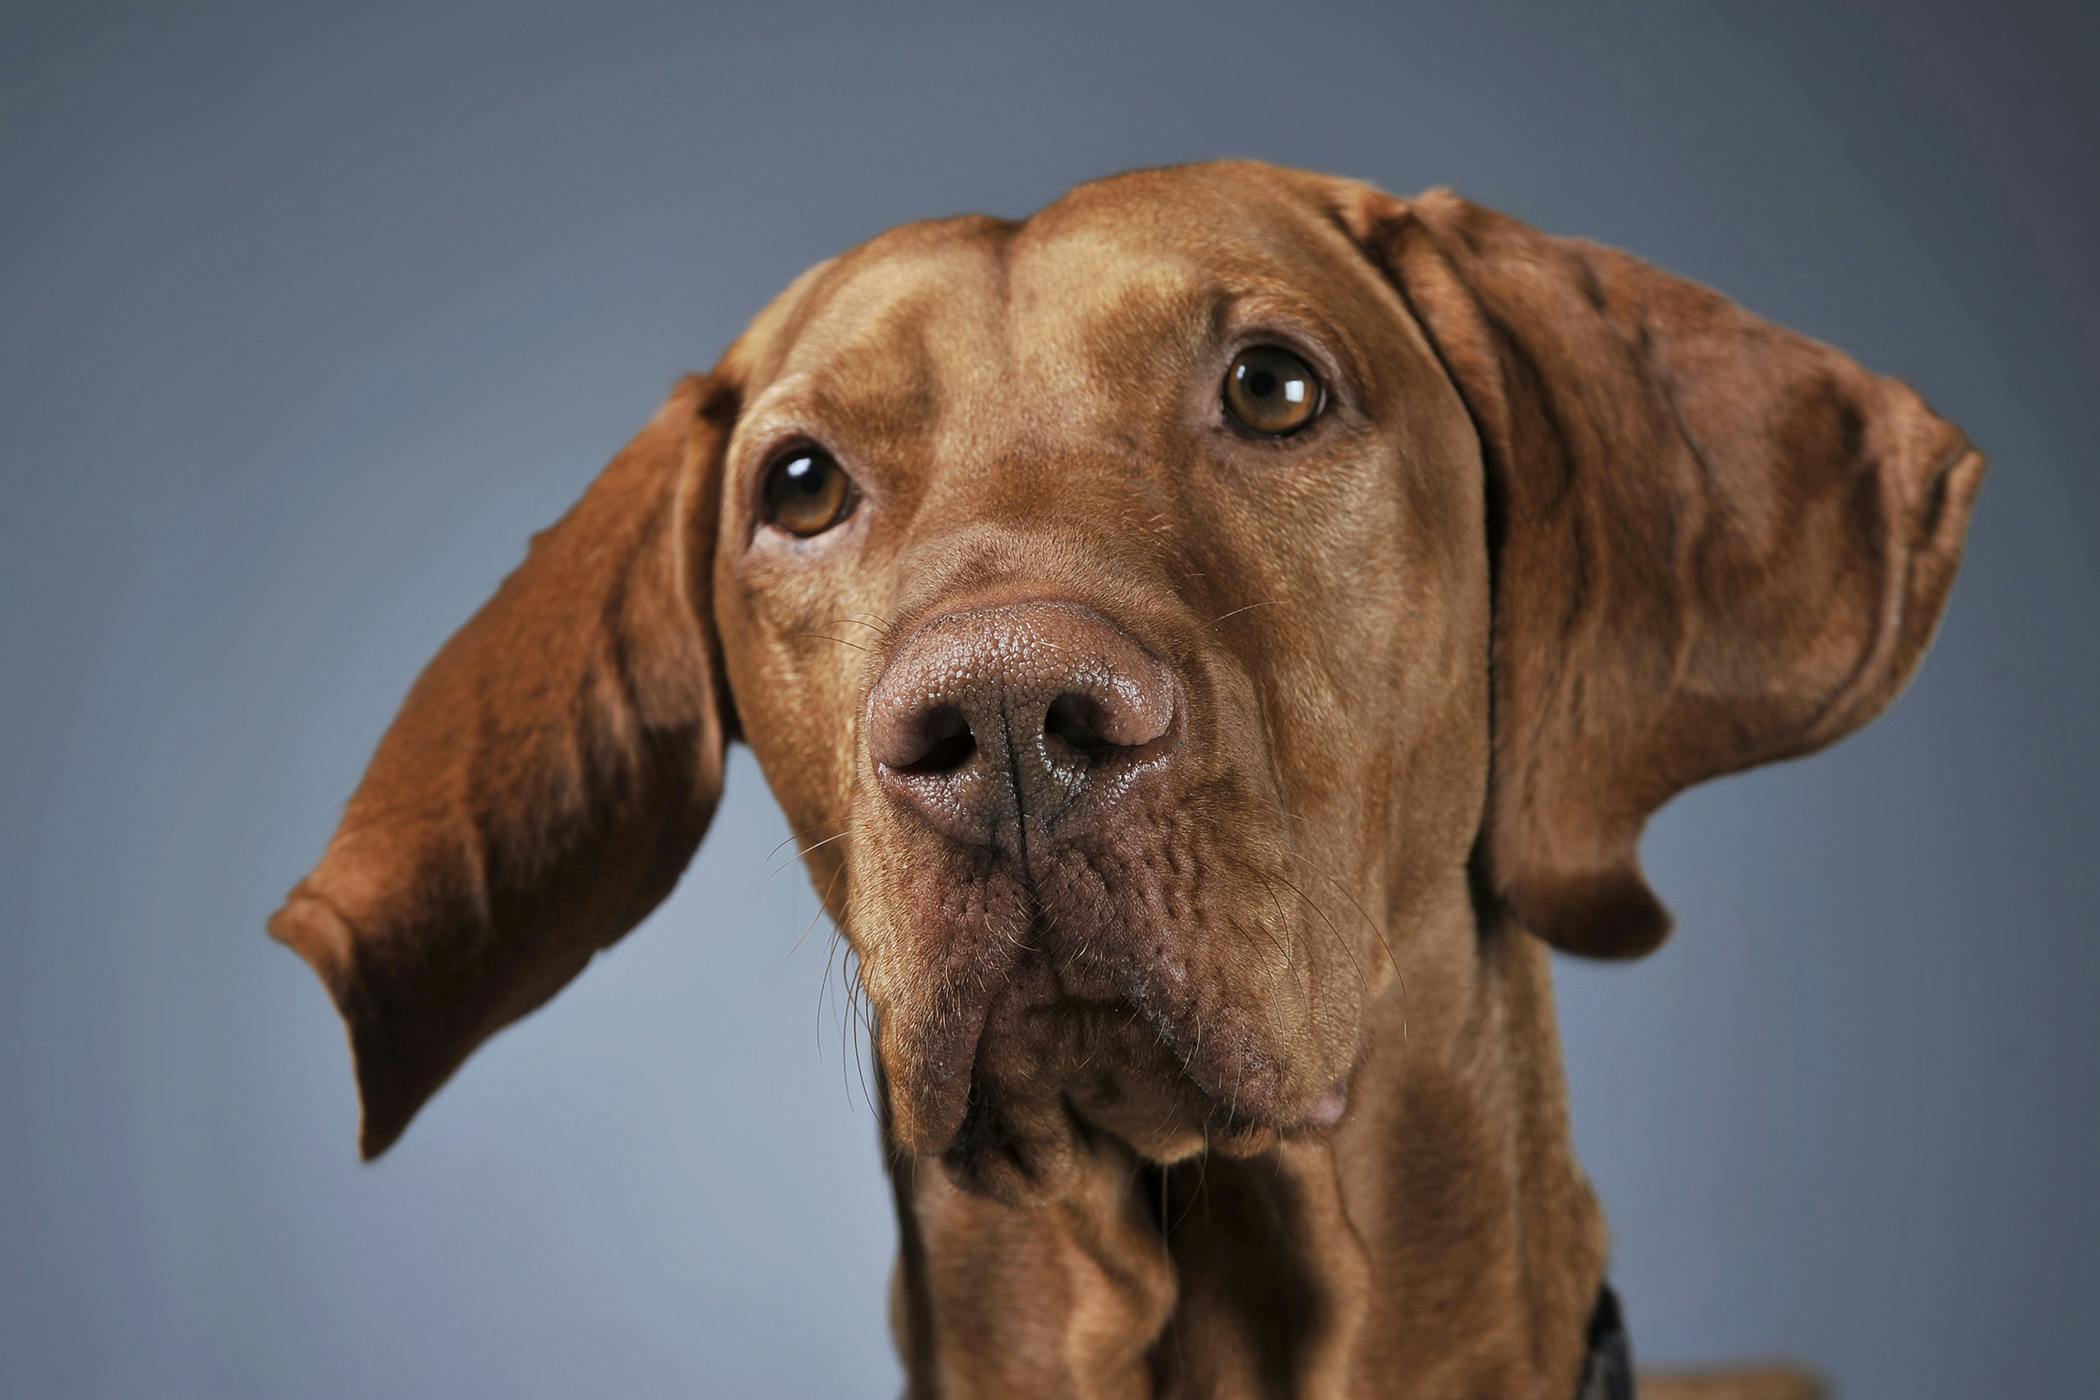 can dogs recover from pancreatitis